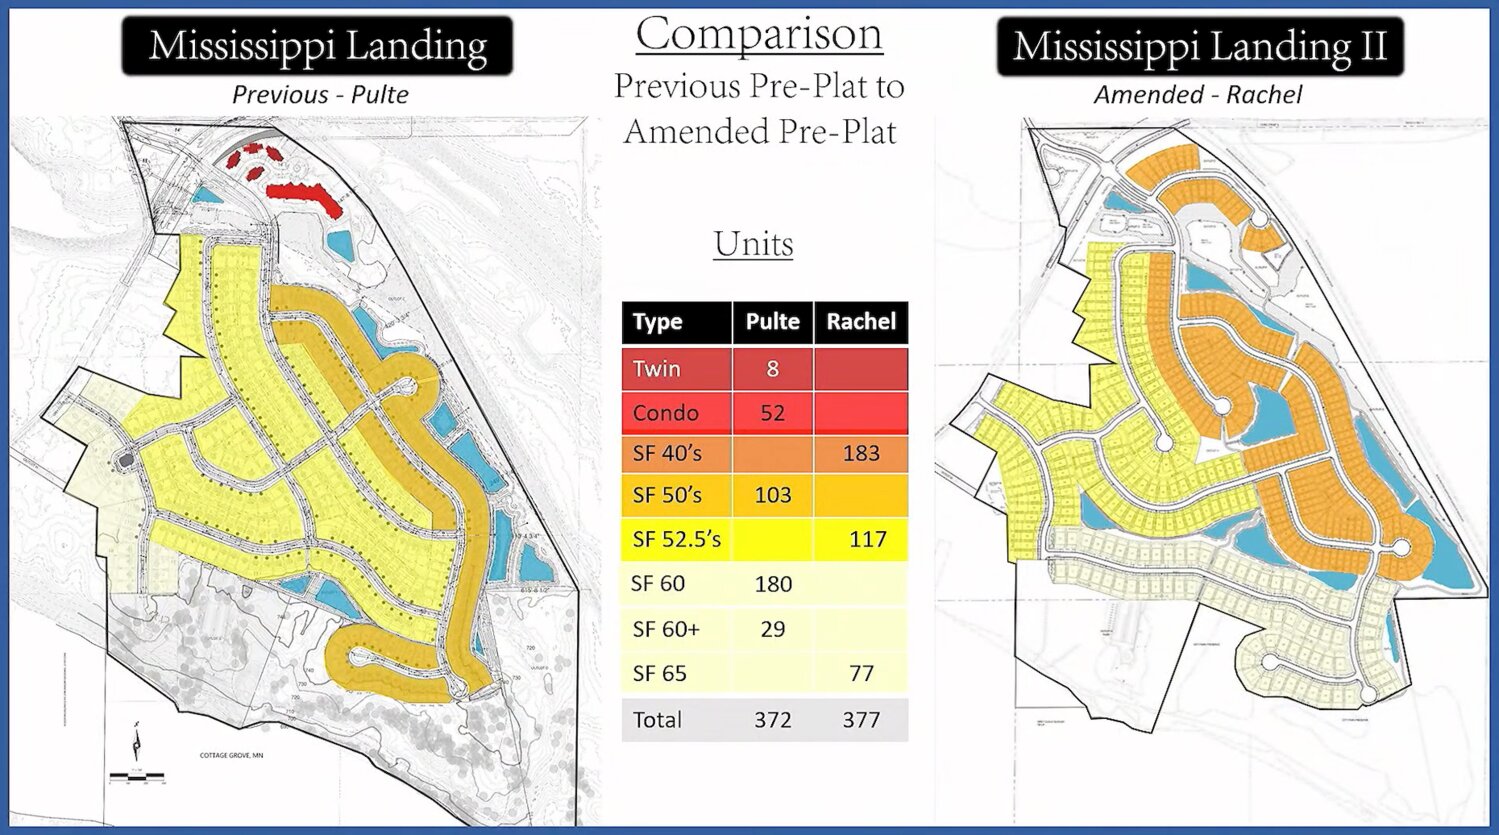 The two plats side by side showing similarity and difference between Mississippi Landings by Pulte (the old plat) and Mississippi Landing II by Rachel Development.